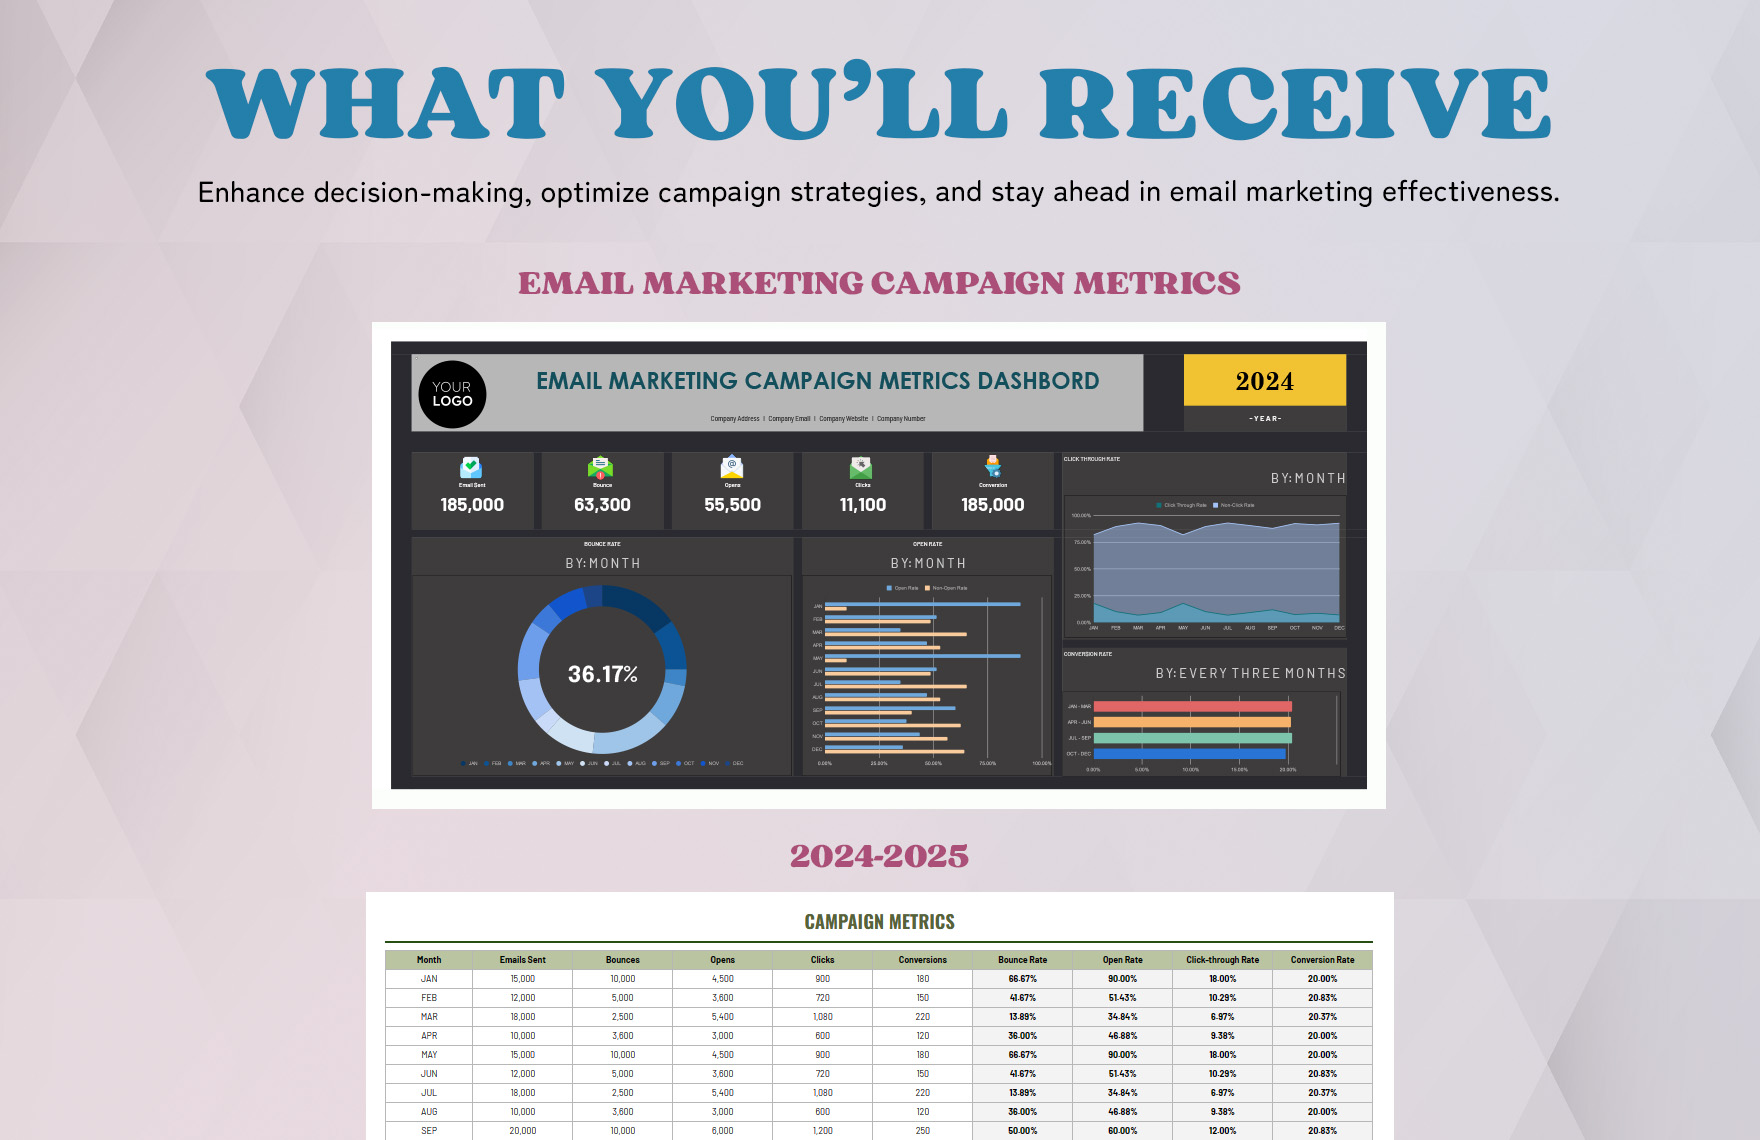 Email Marketing Campaign Metrics Dashboard Template